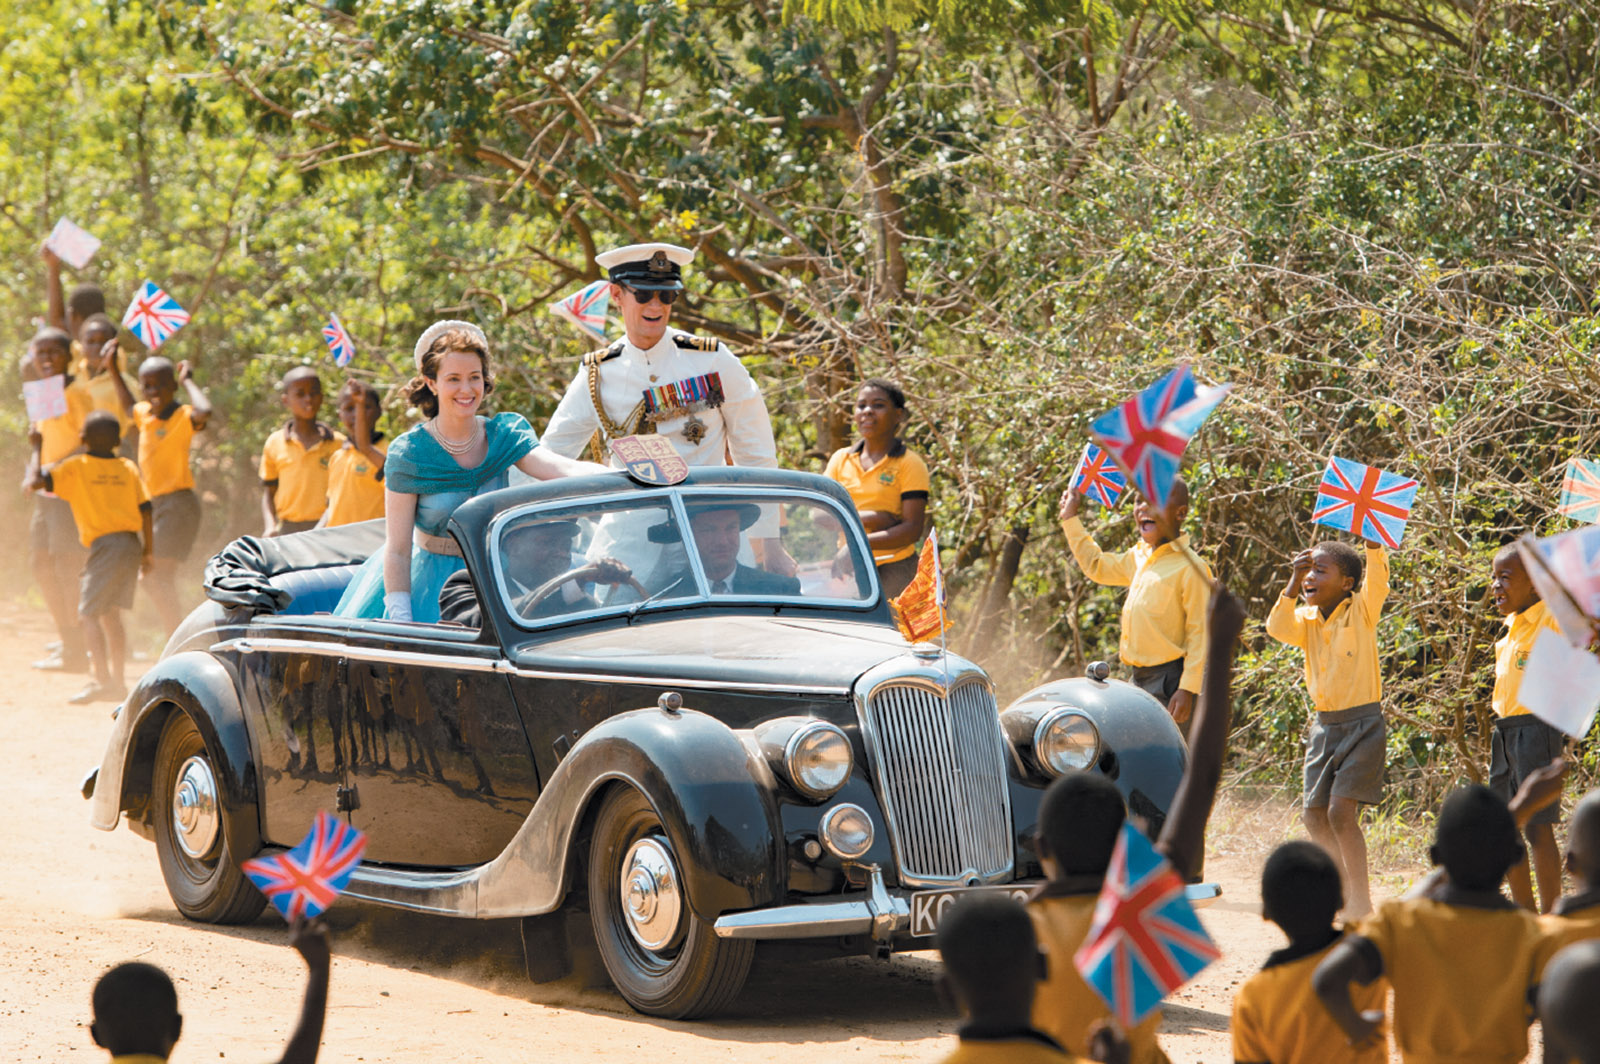 Claire Foy as Princess Elizabeth and Matt Smith as Prince Philip on a visit to Kenya in 1952, shortly before she became queen, in The Crown